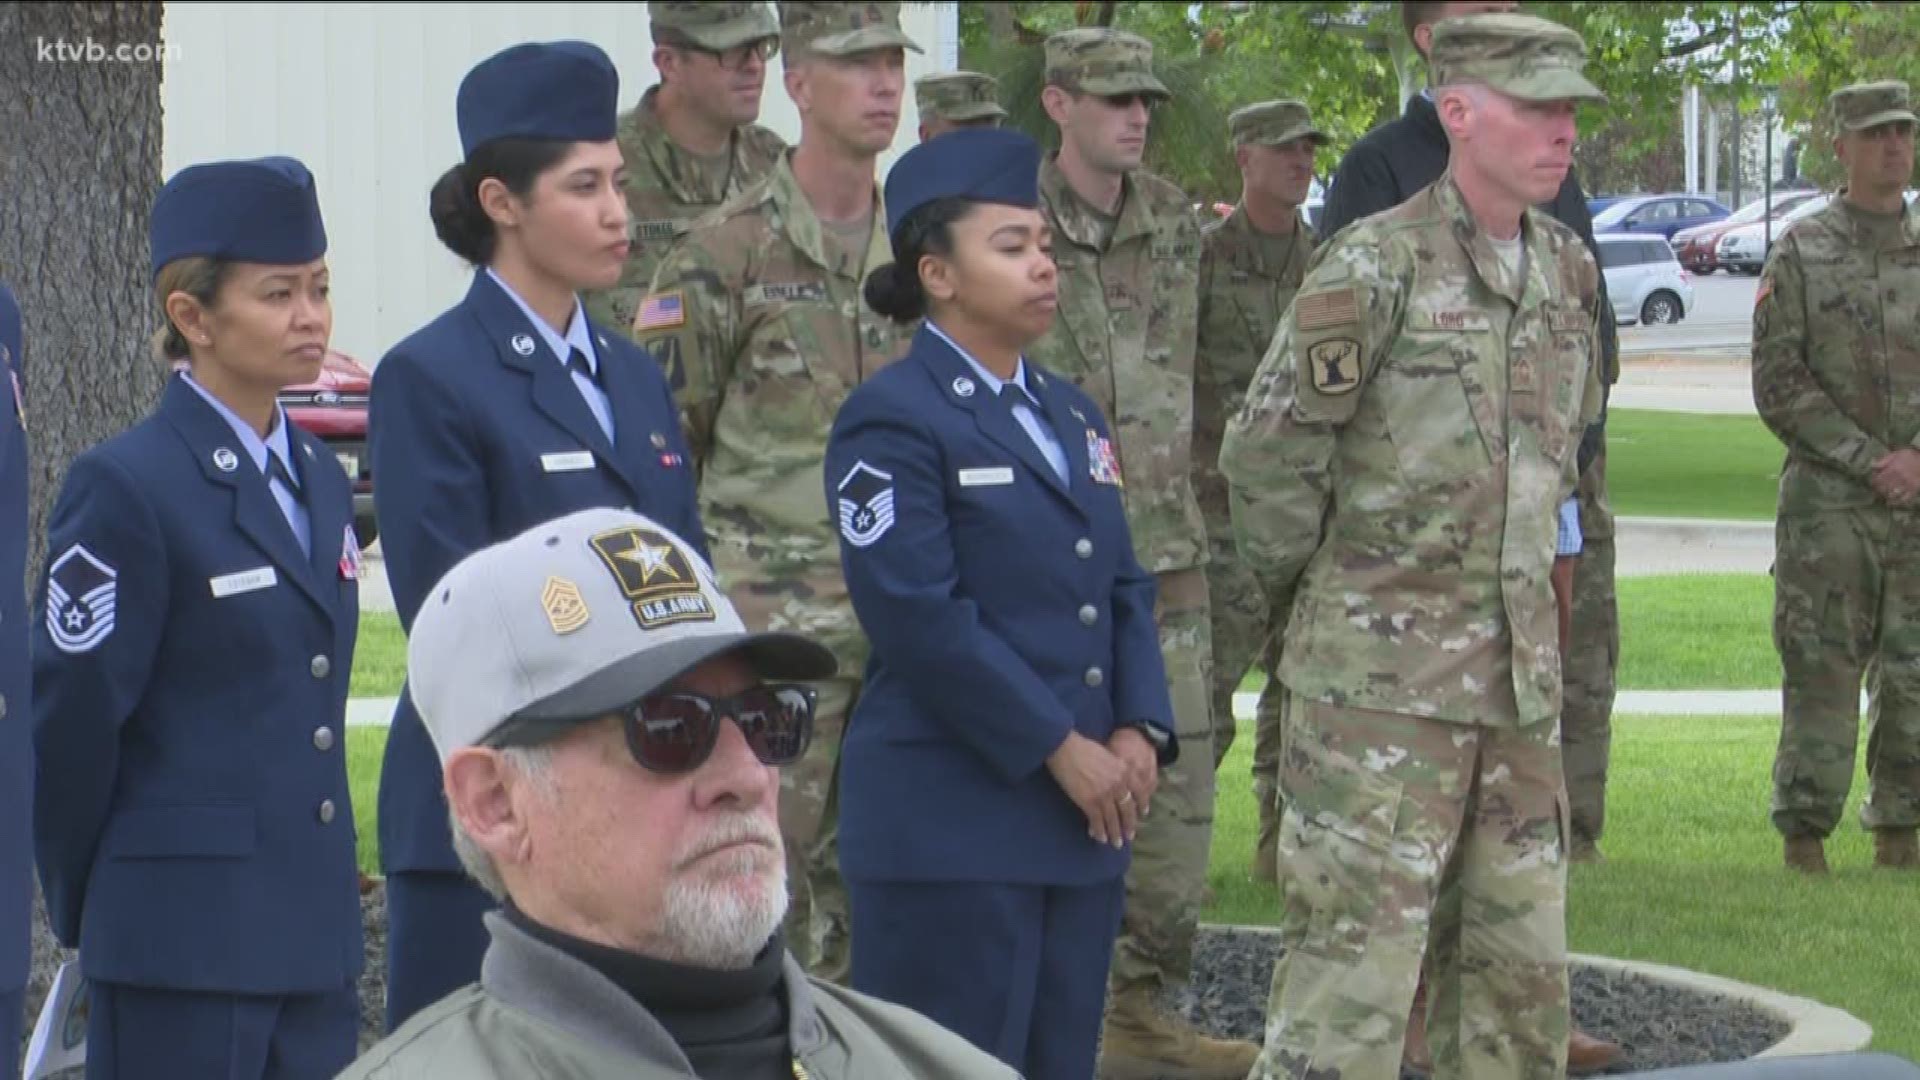 The ceremony was put on by the Idaho National Guard.